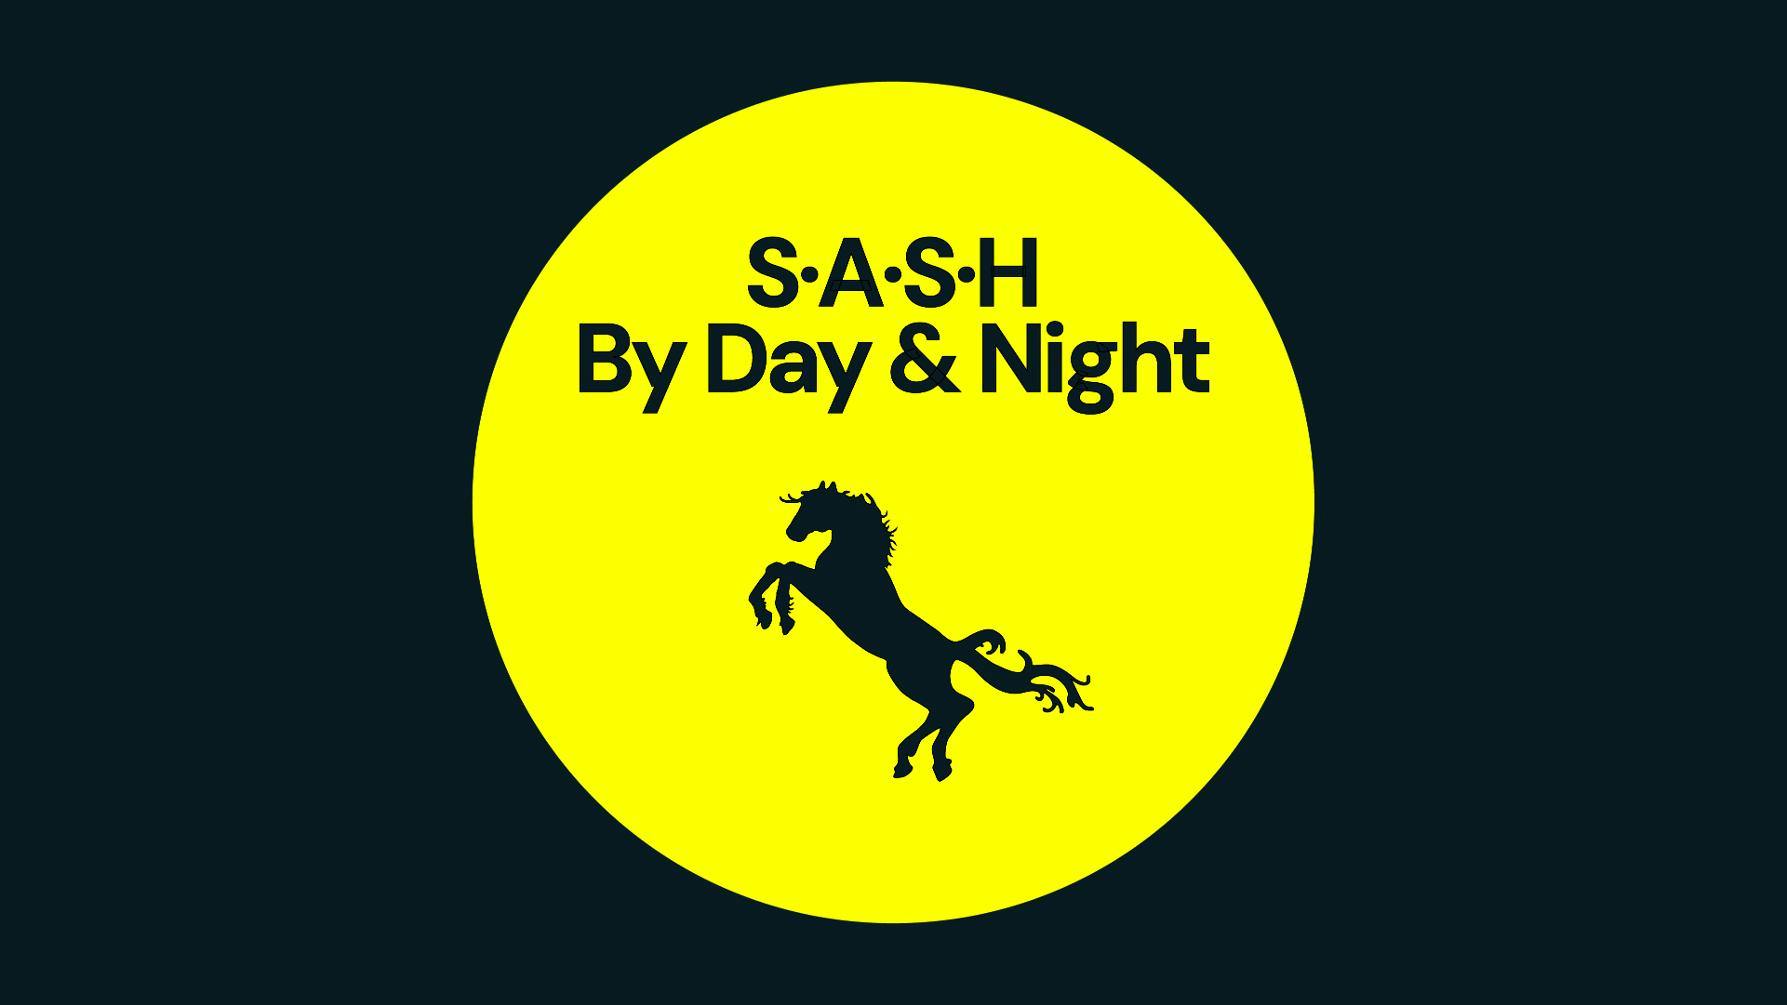 ★ S.A.S.H By Day & Night ★ Sunday 30th June ★